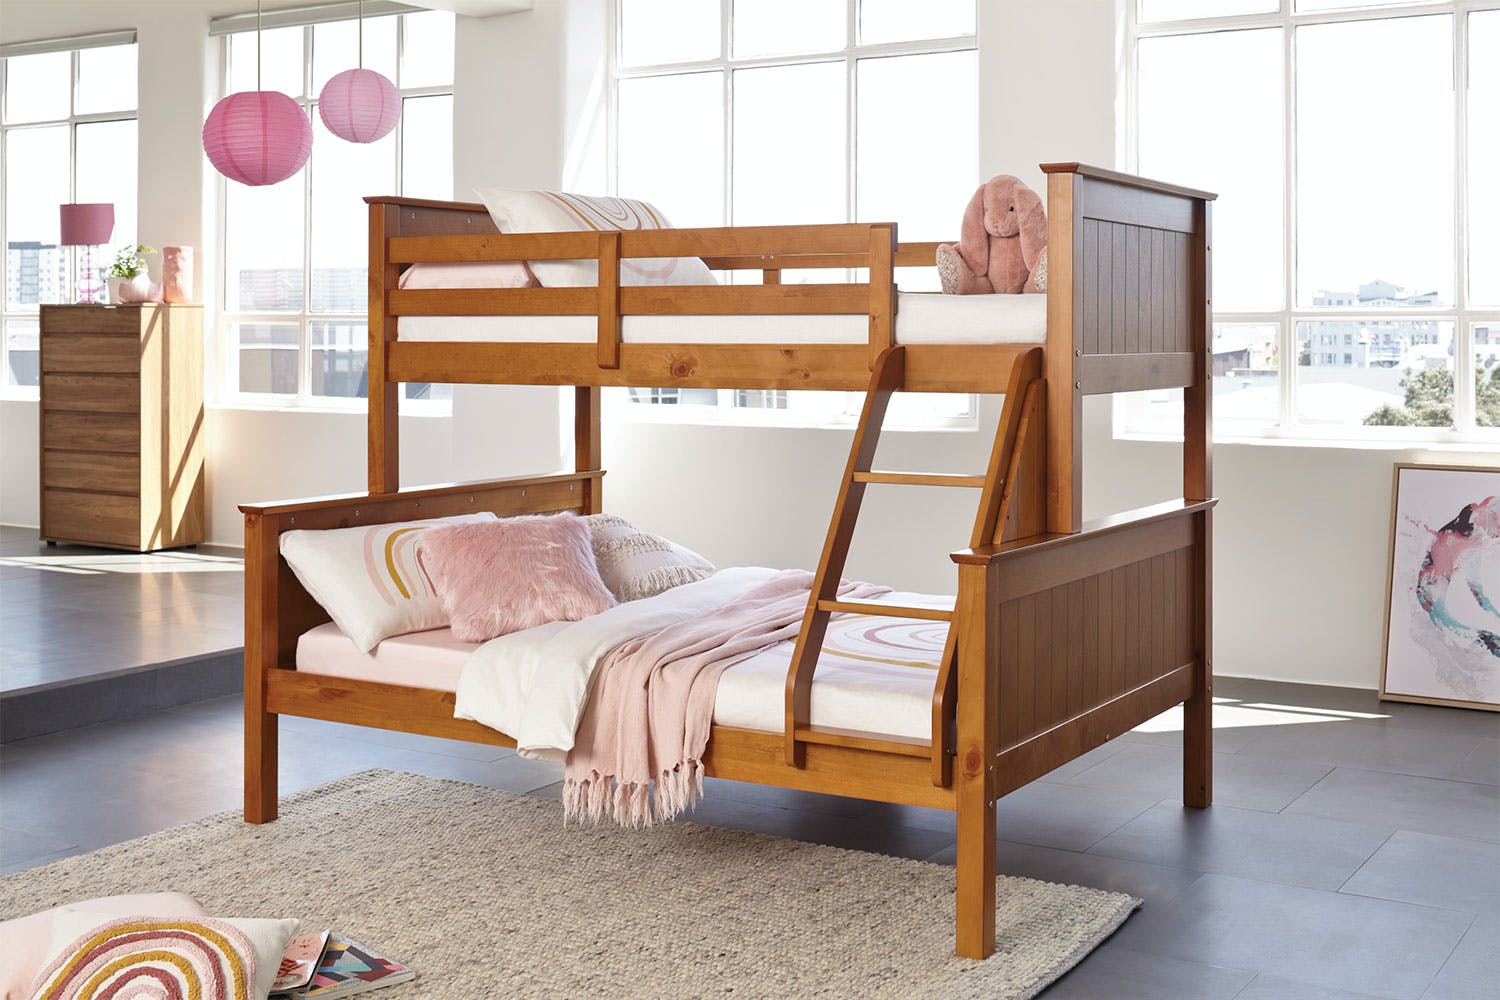 Buy Quality Bedroom Furniture Items in Melbourne